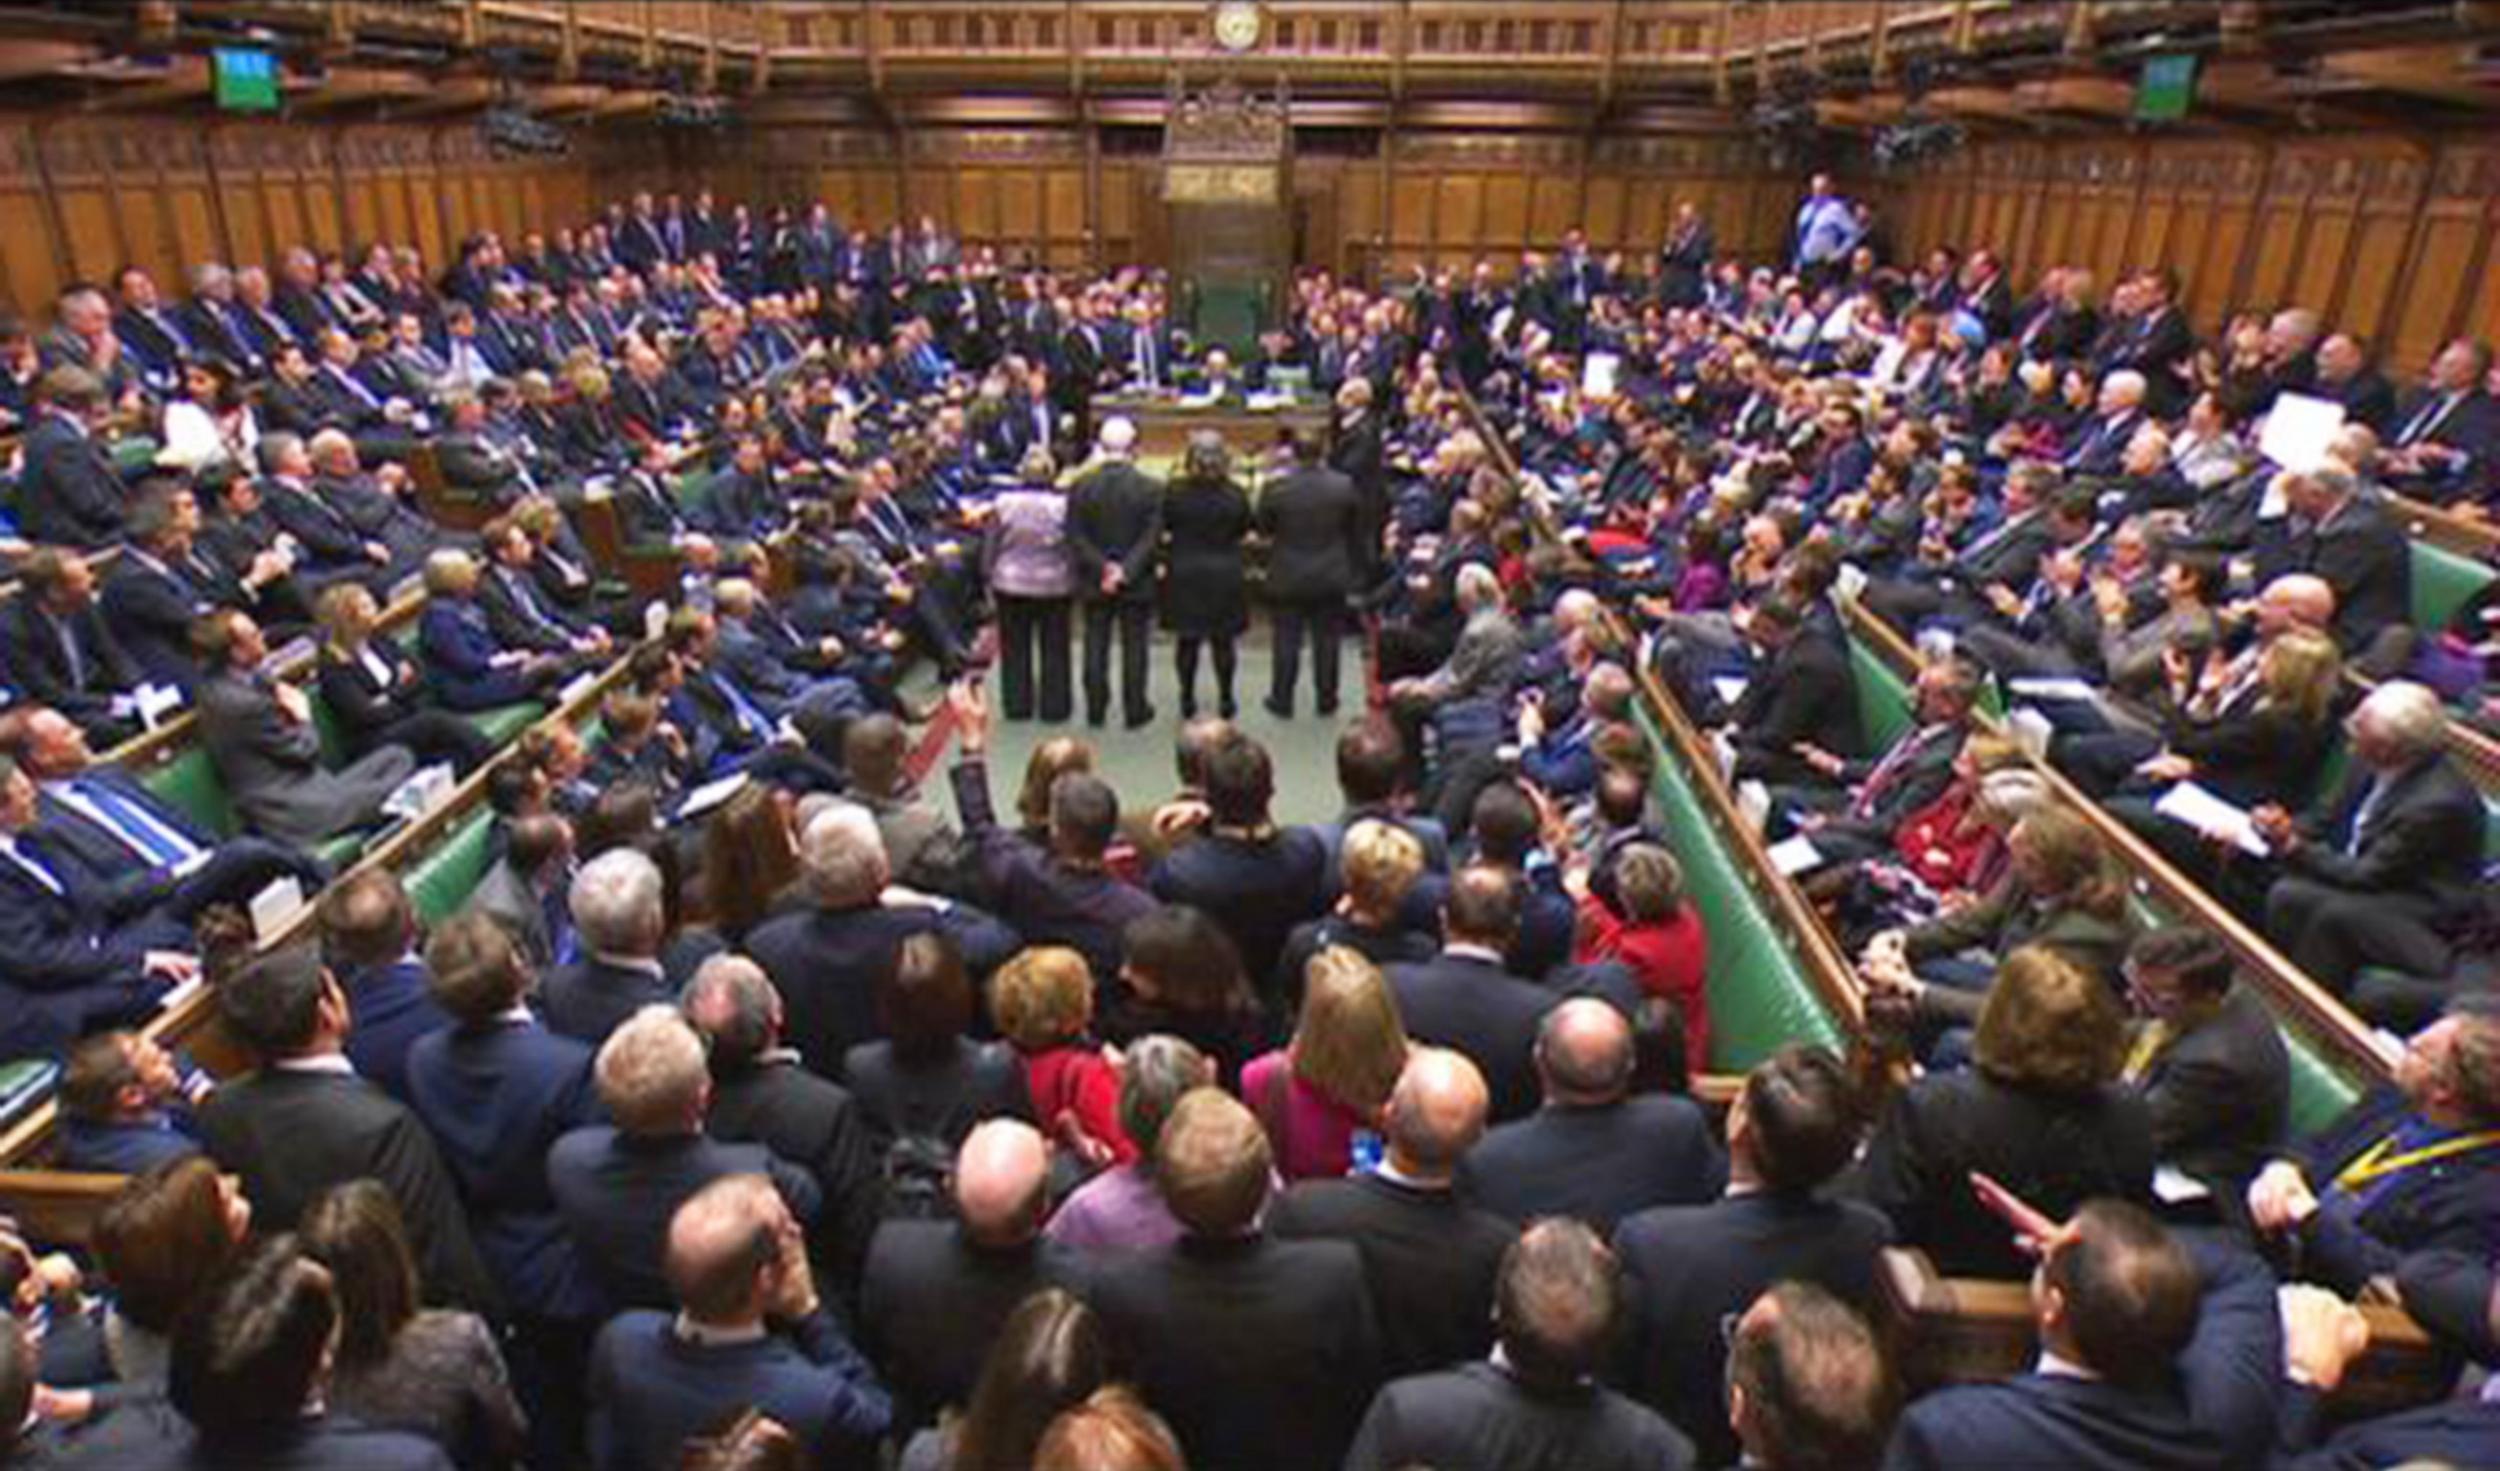 MPs during a vote in the Commons chamber